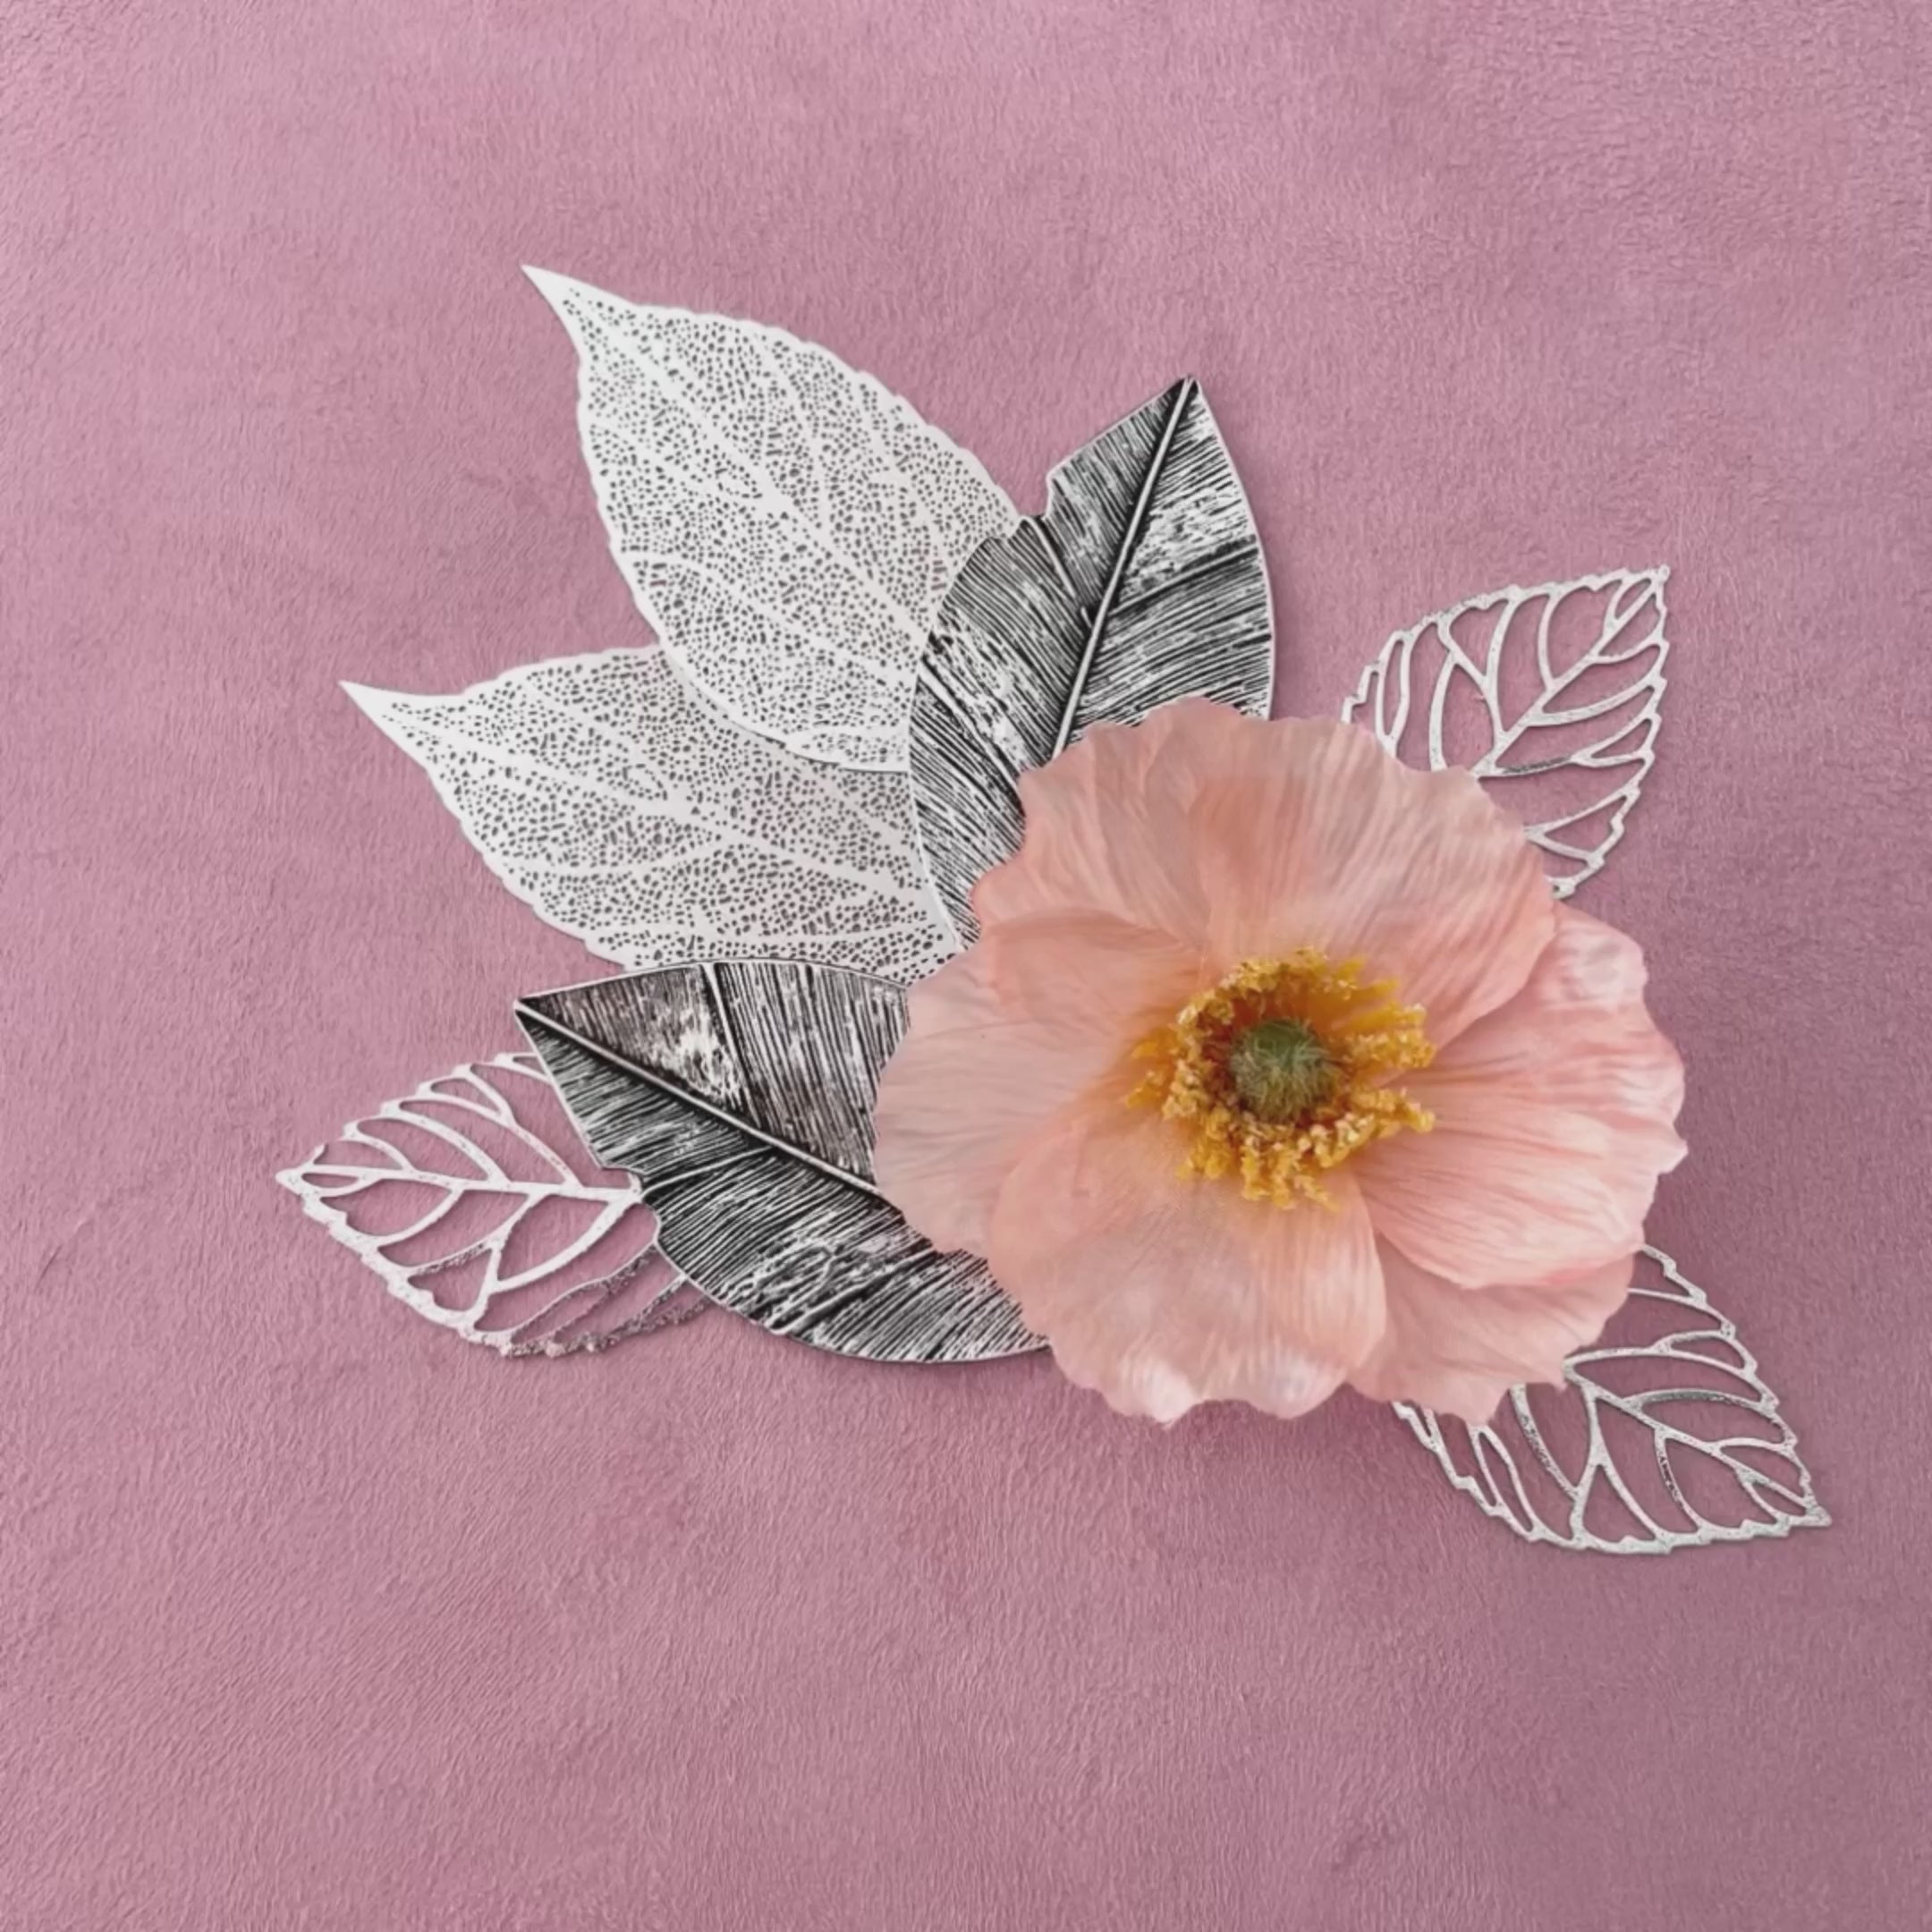 Video of 7 styling leaves including 3 silver leaves, 2 silver leaves that are larger, and 2 large silver with dark accent leaves - wedding flat lay props from Champagne & GRIT